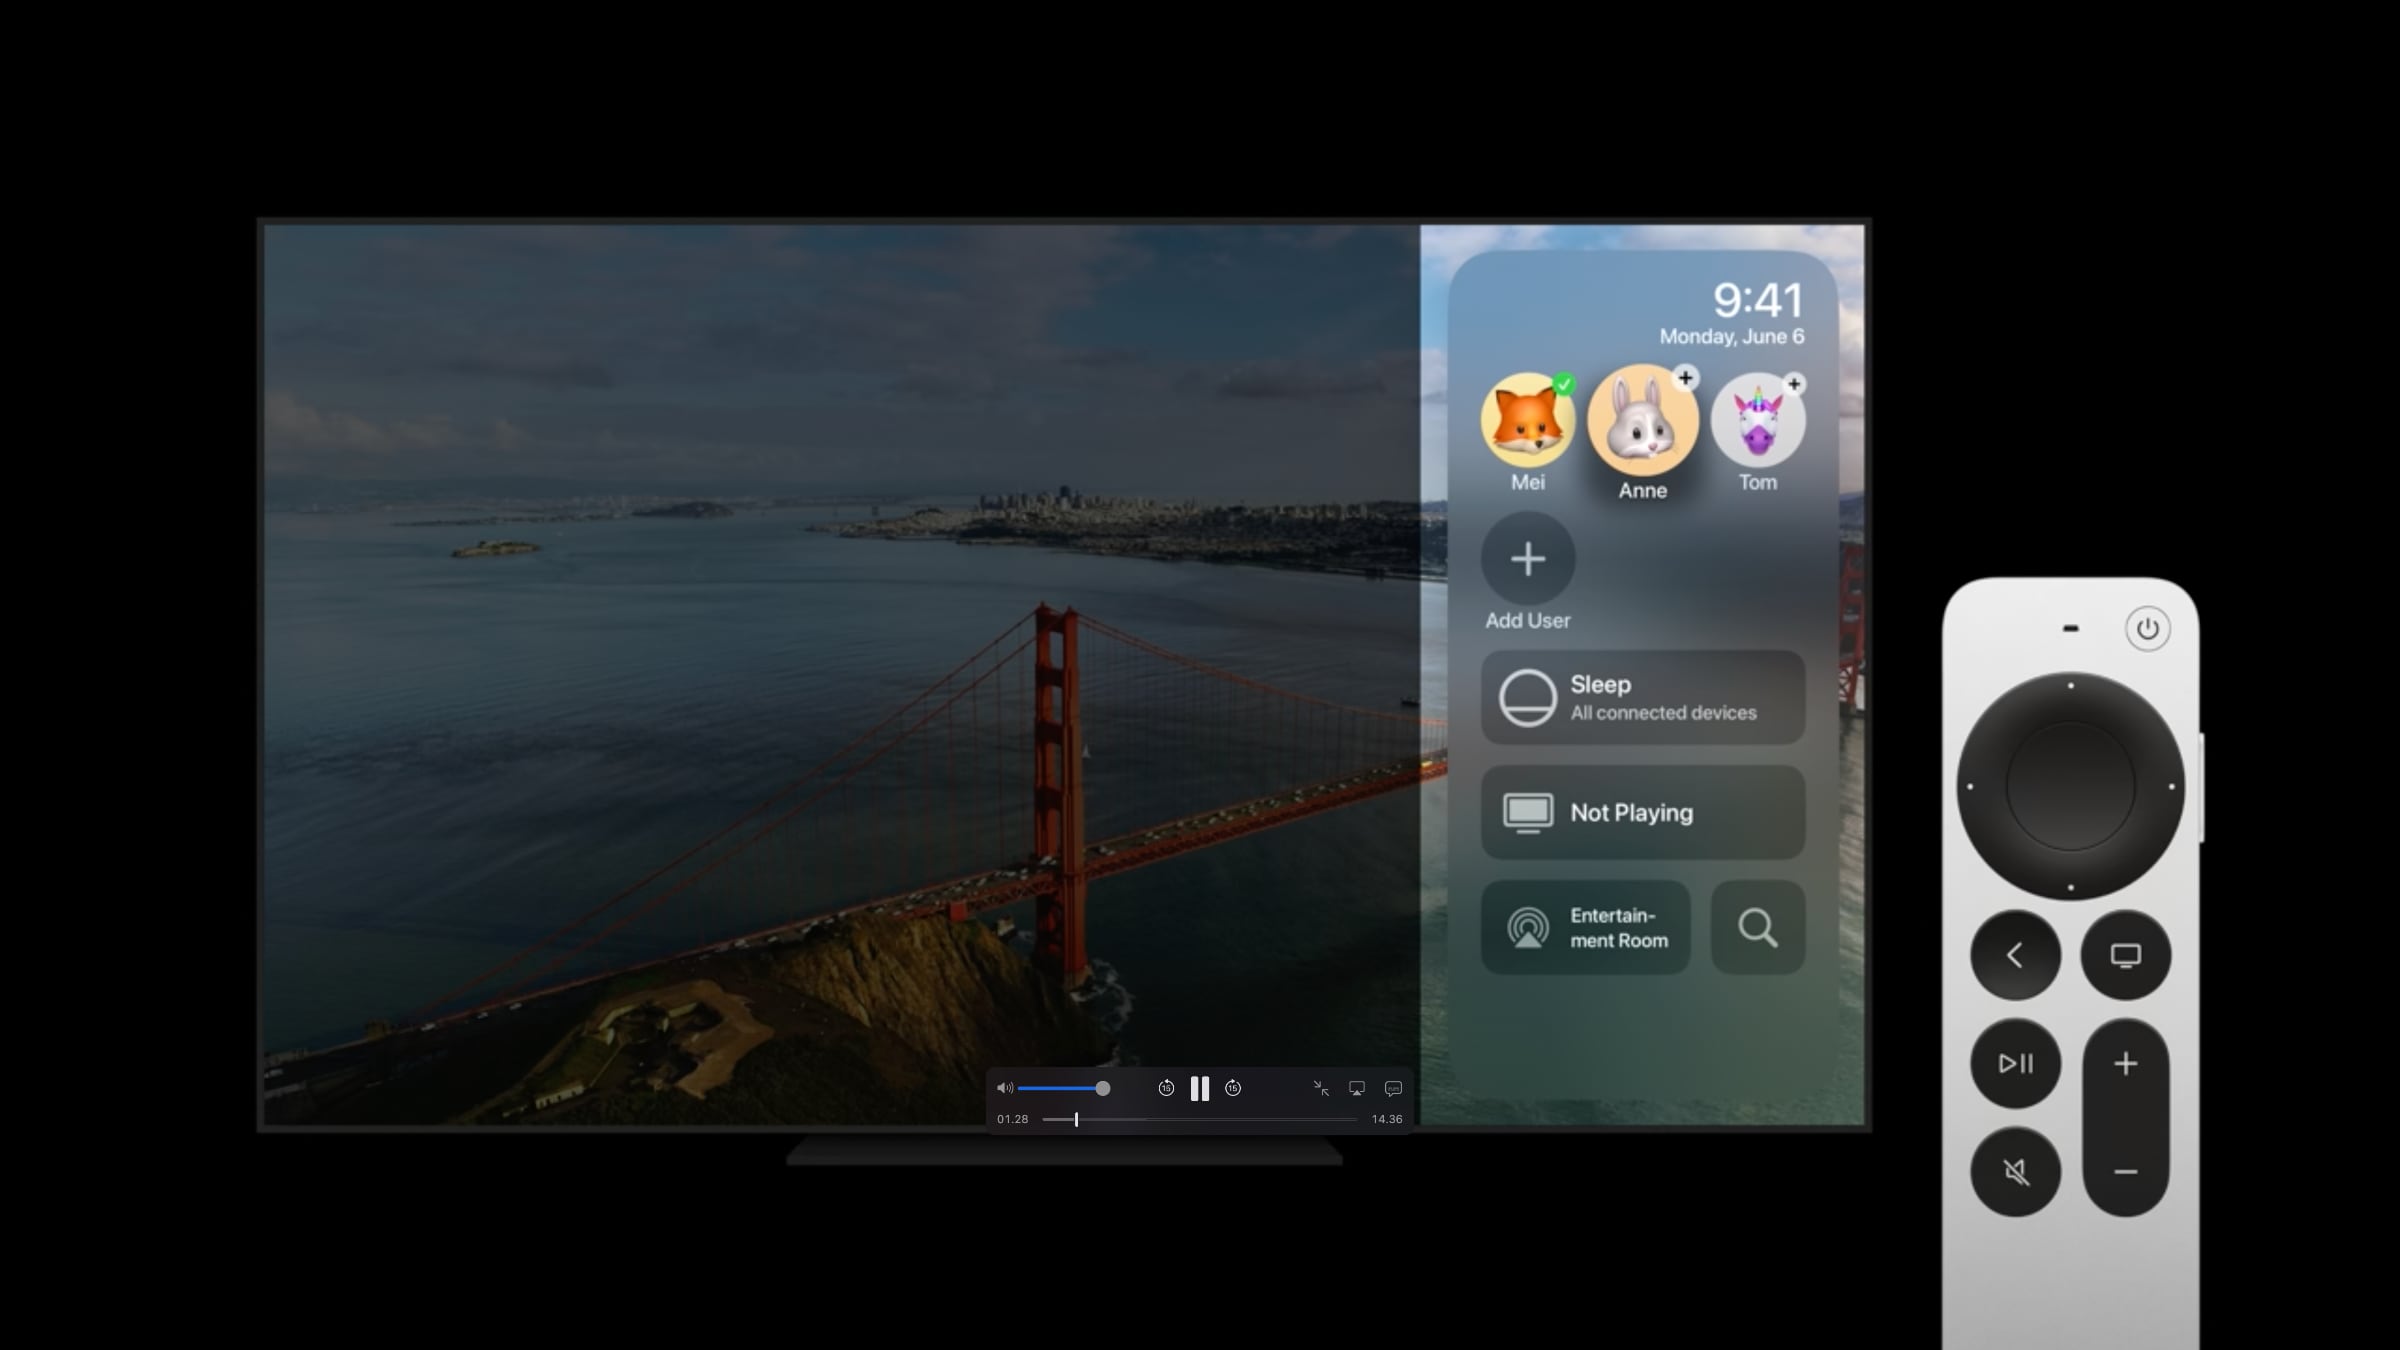 tvOS to include improved game controller support updated - FlatpanelsHD